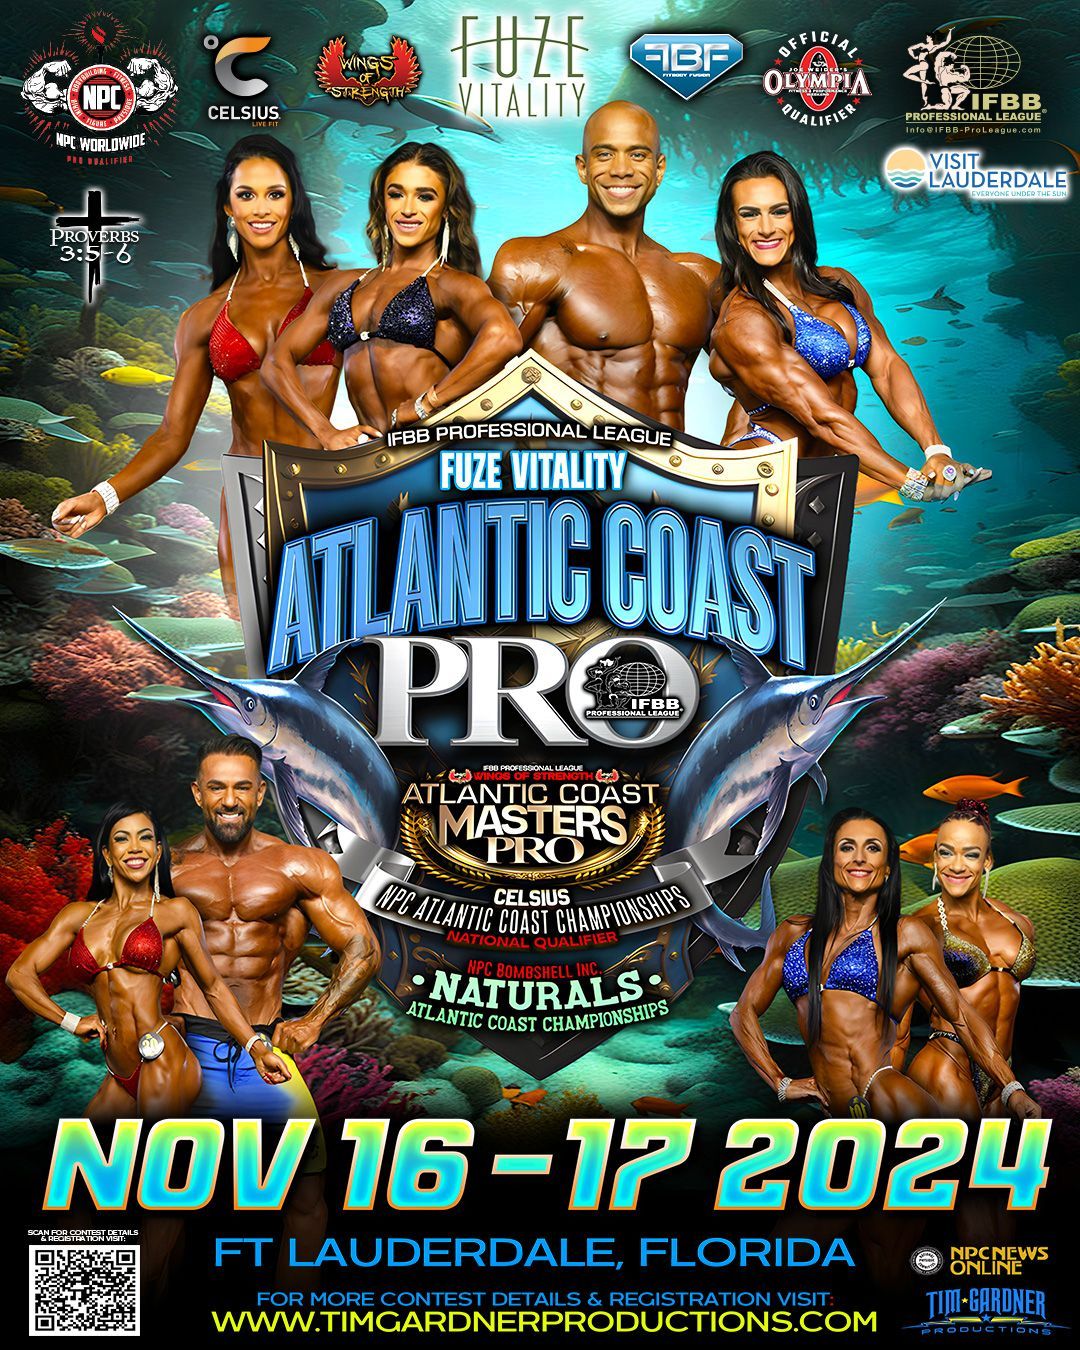 A poster for the atlantic coast pro bodybuilding competition